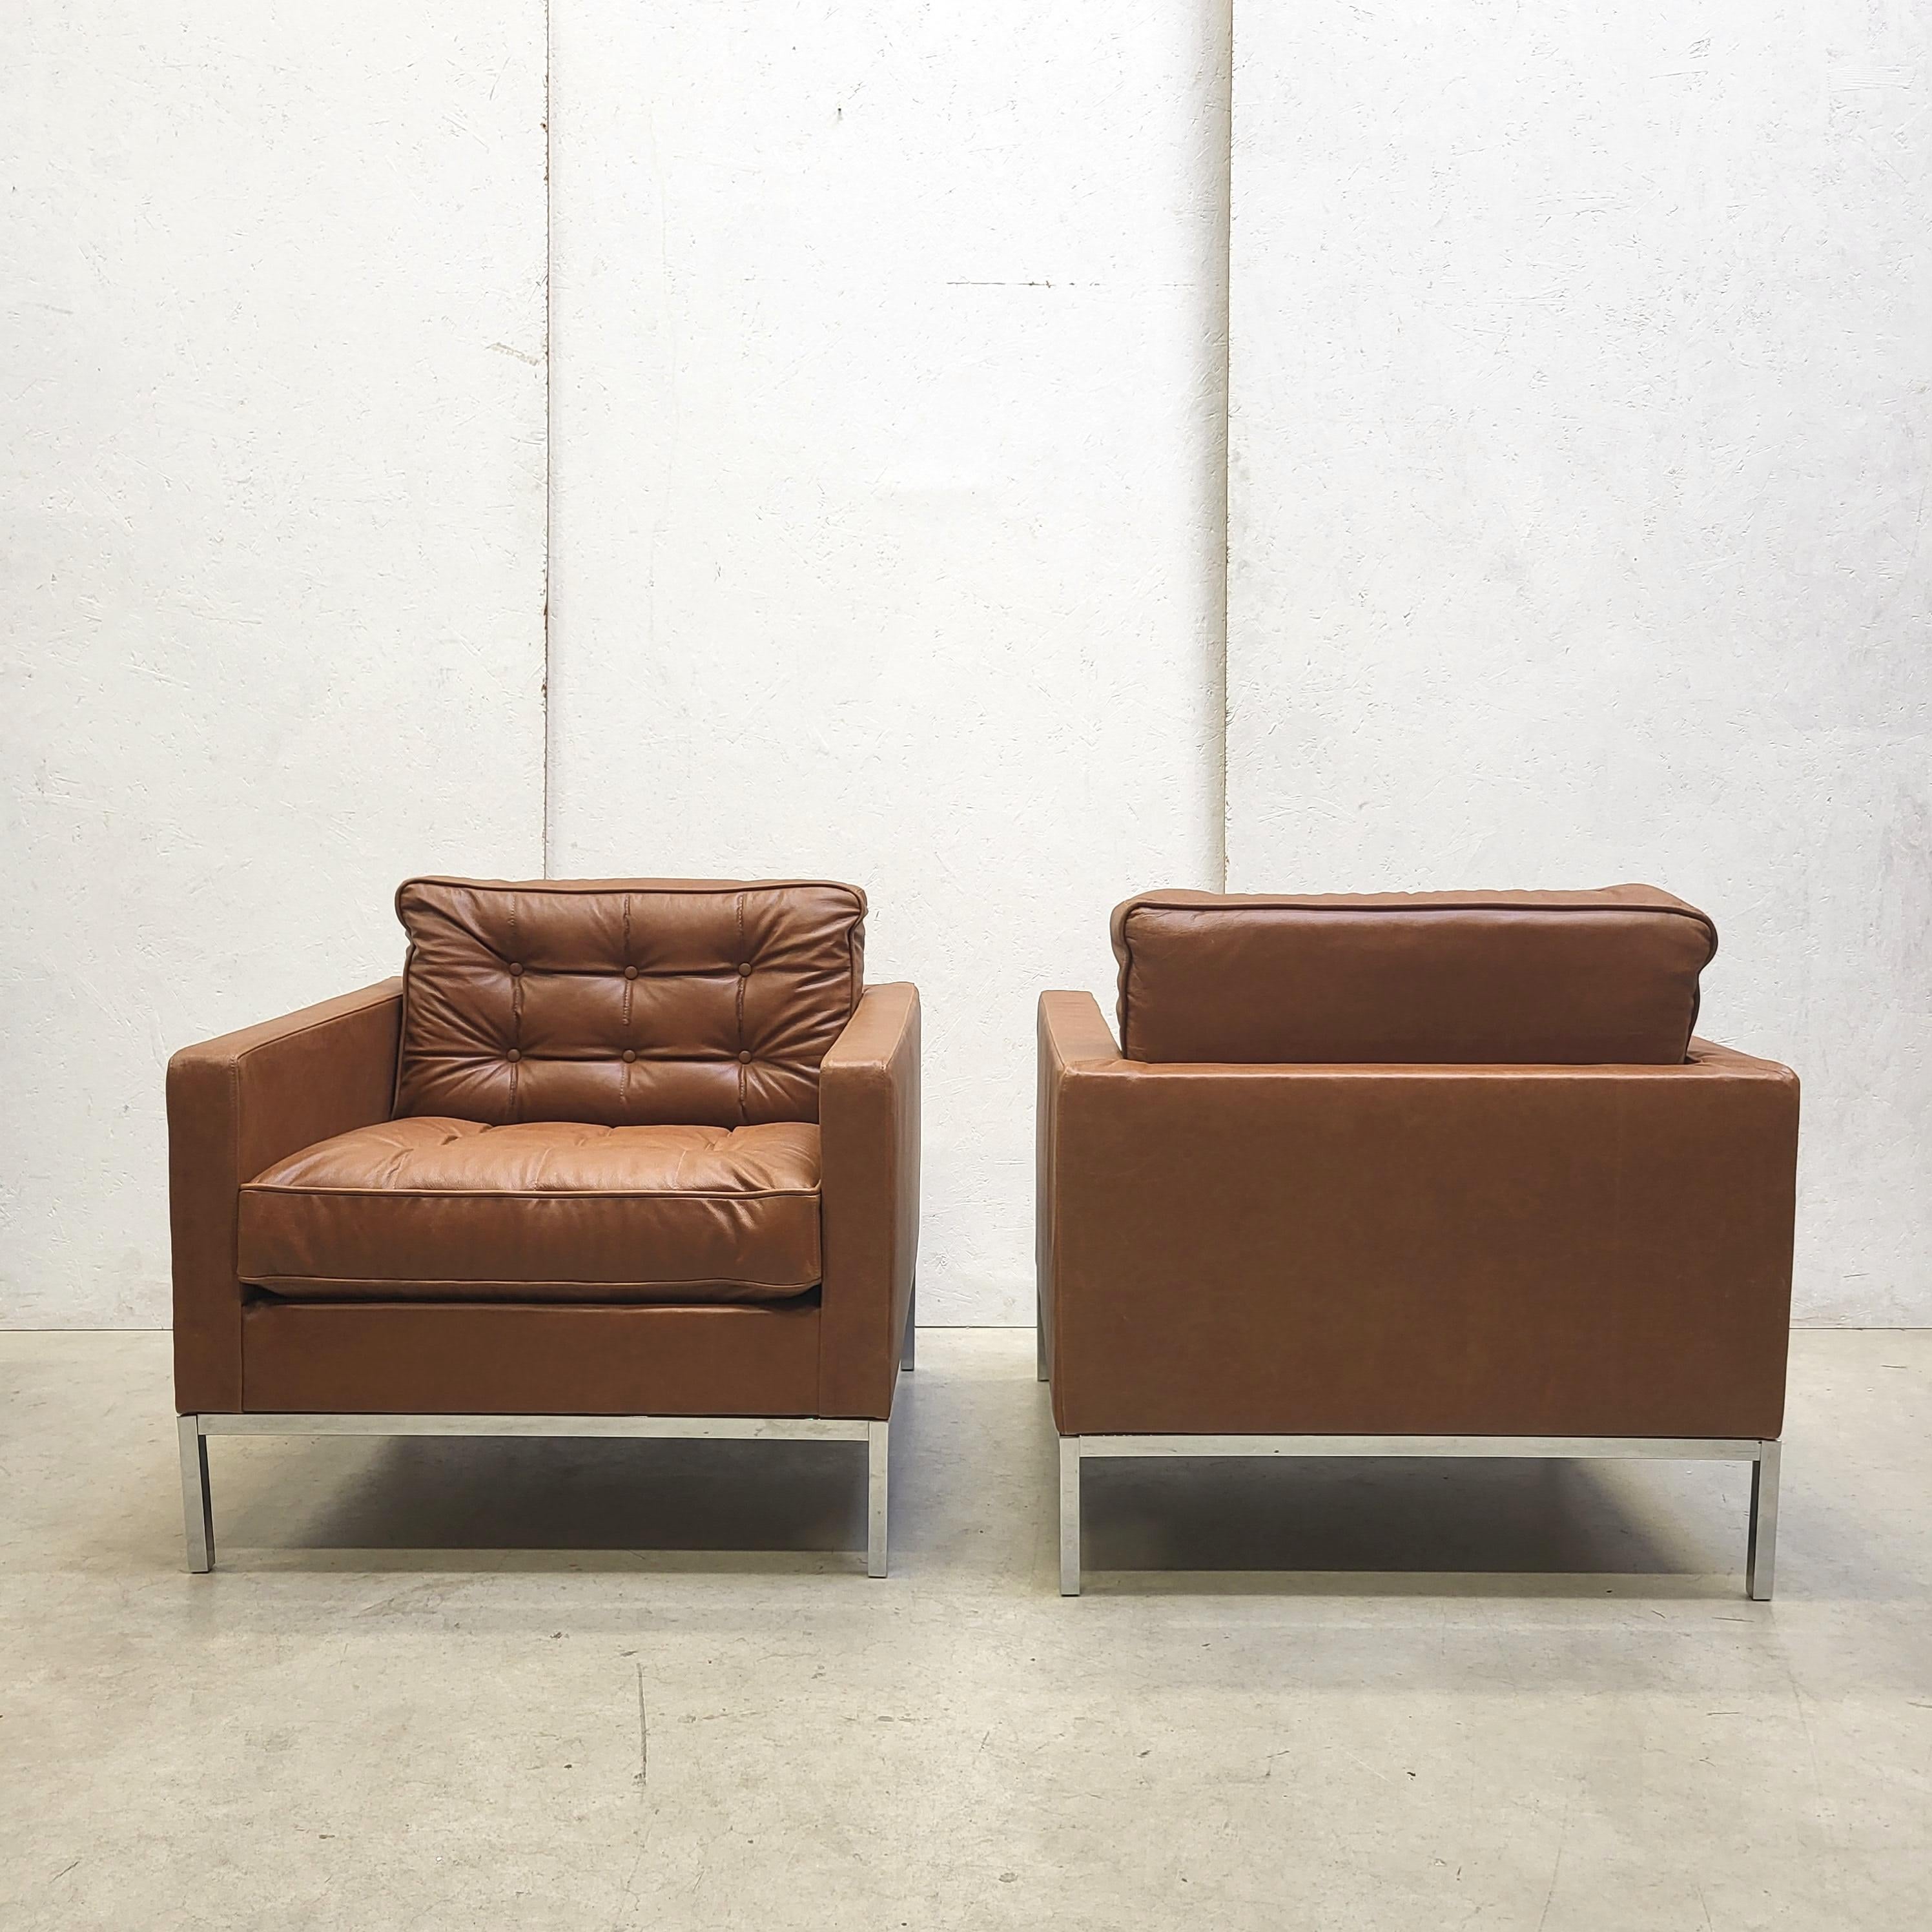 Late 20th Century 2x 3 Seater Knoll Studio Sofa and 2x Club Chair by Florence Knoll Pine Brown